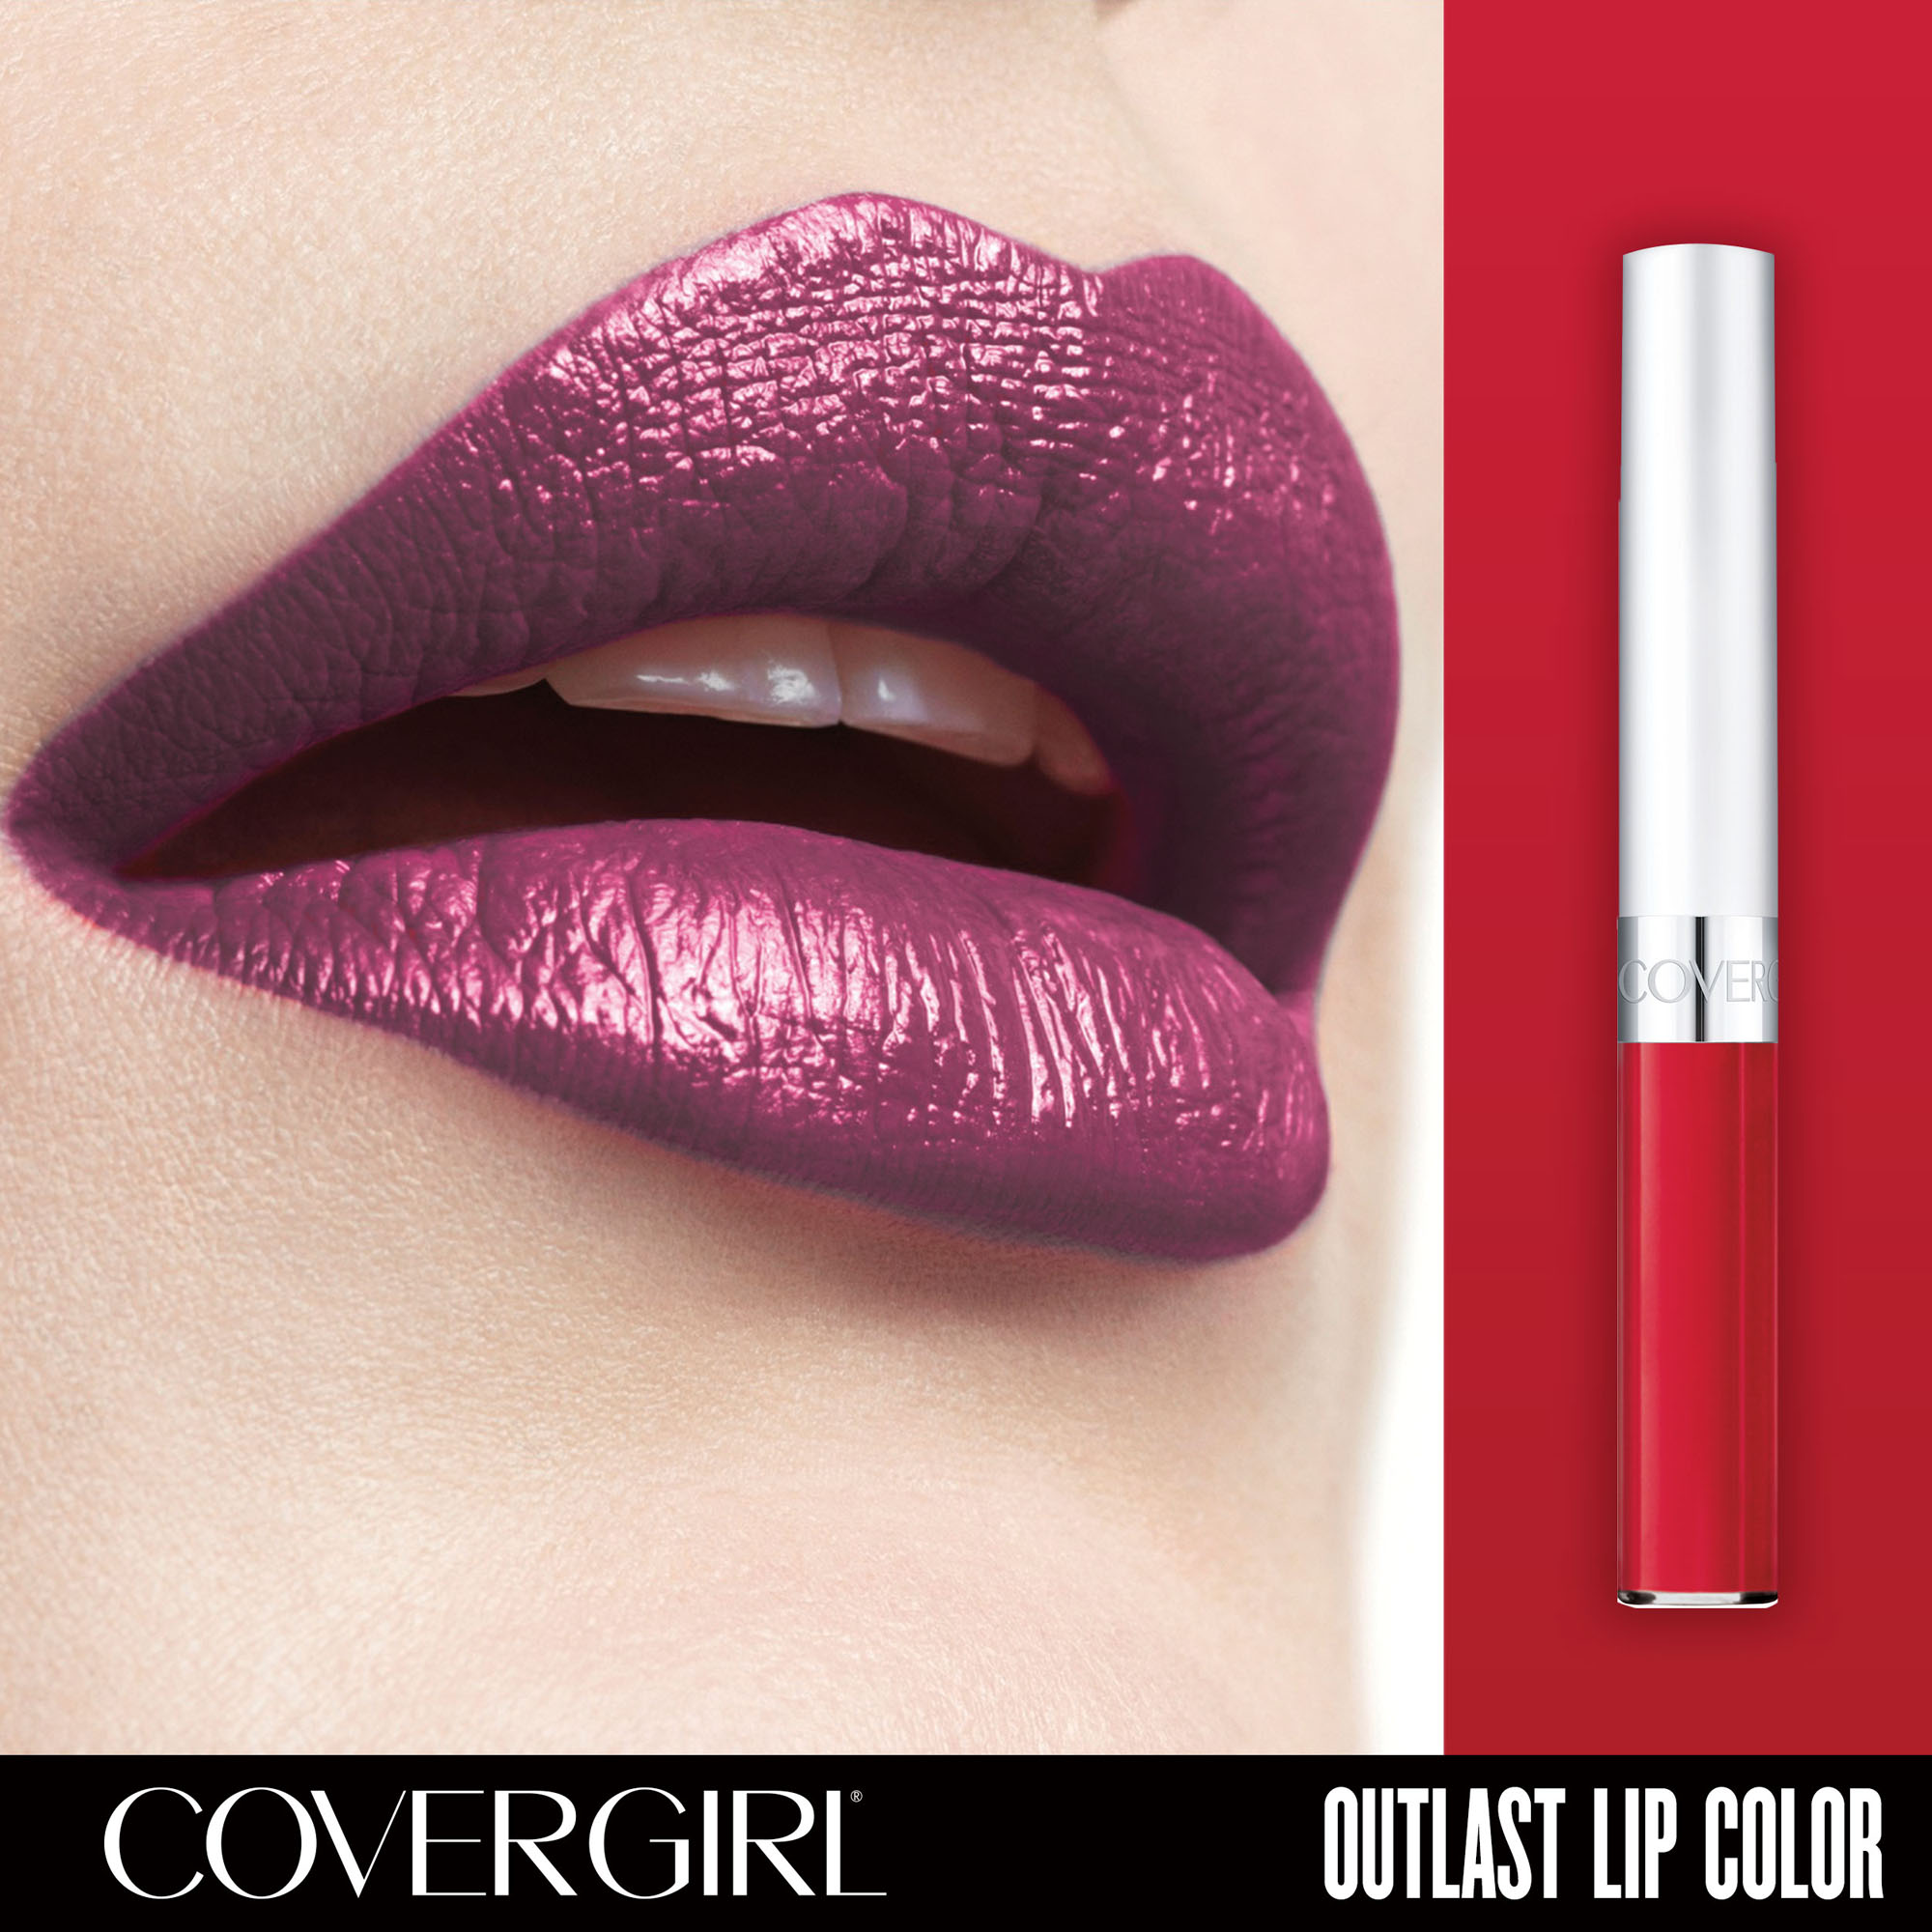 COVERGIRL Outlast All-Day Moisturizing Lip Color, Ultra Violet - image 3 of 5